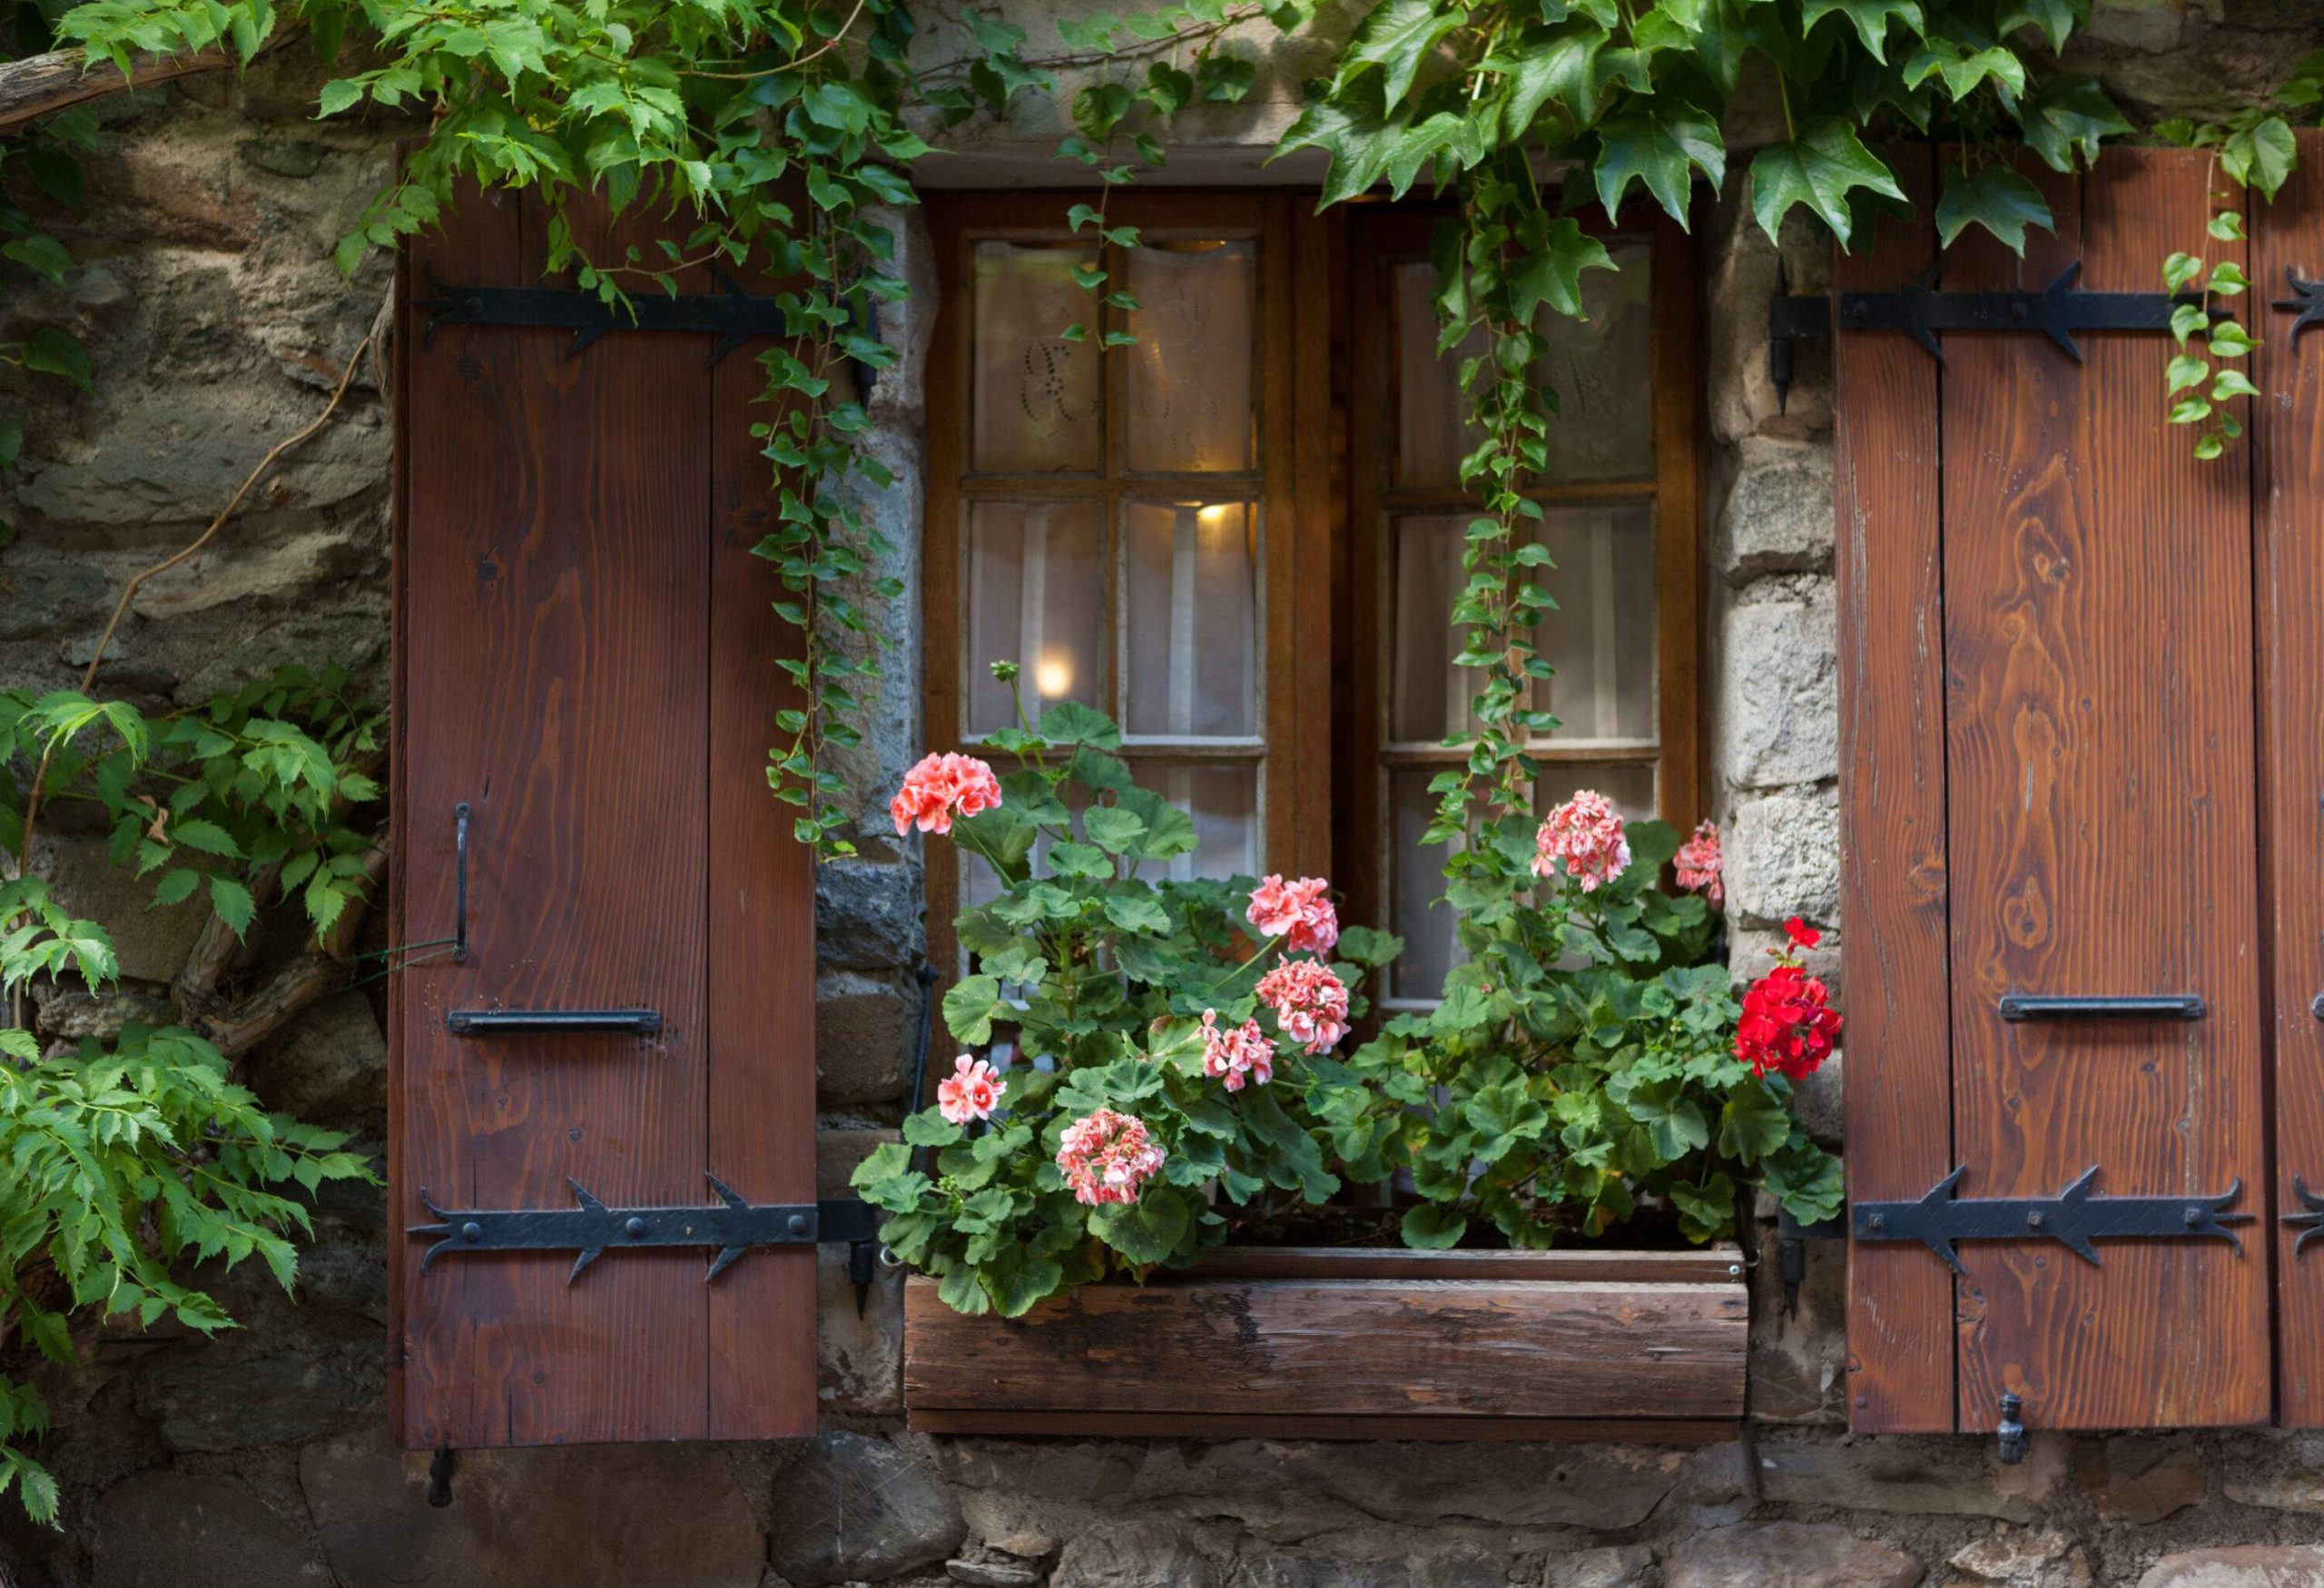 A glass window with wooden shutters and a flower-filled ledge beneath the green vines.